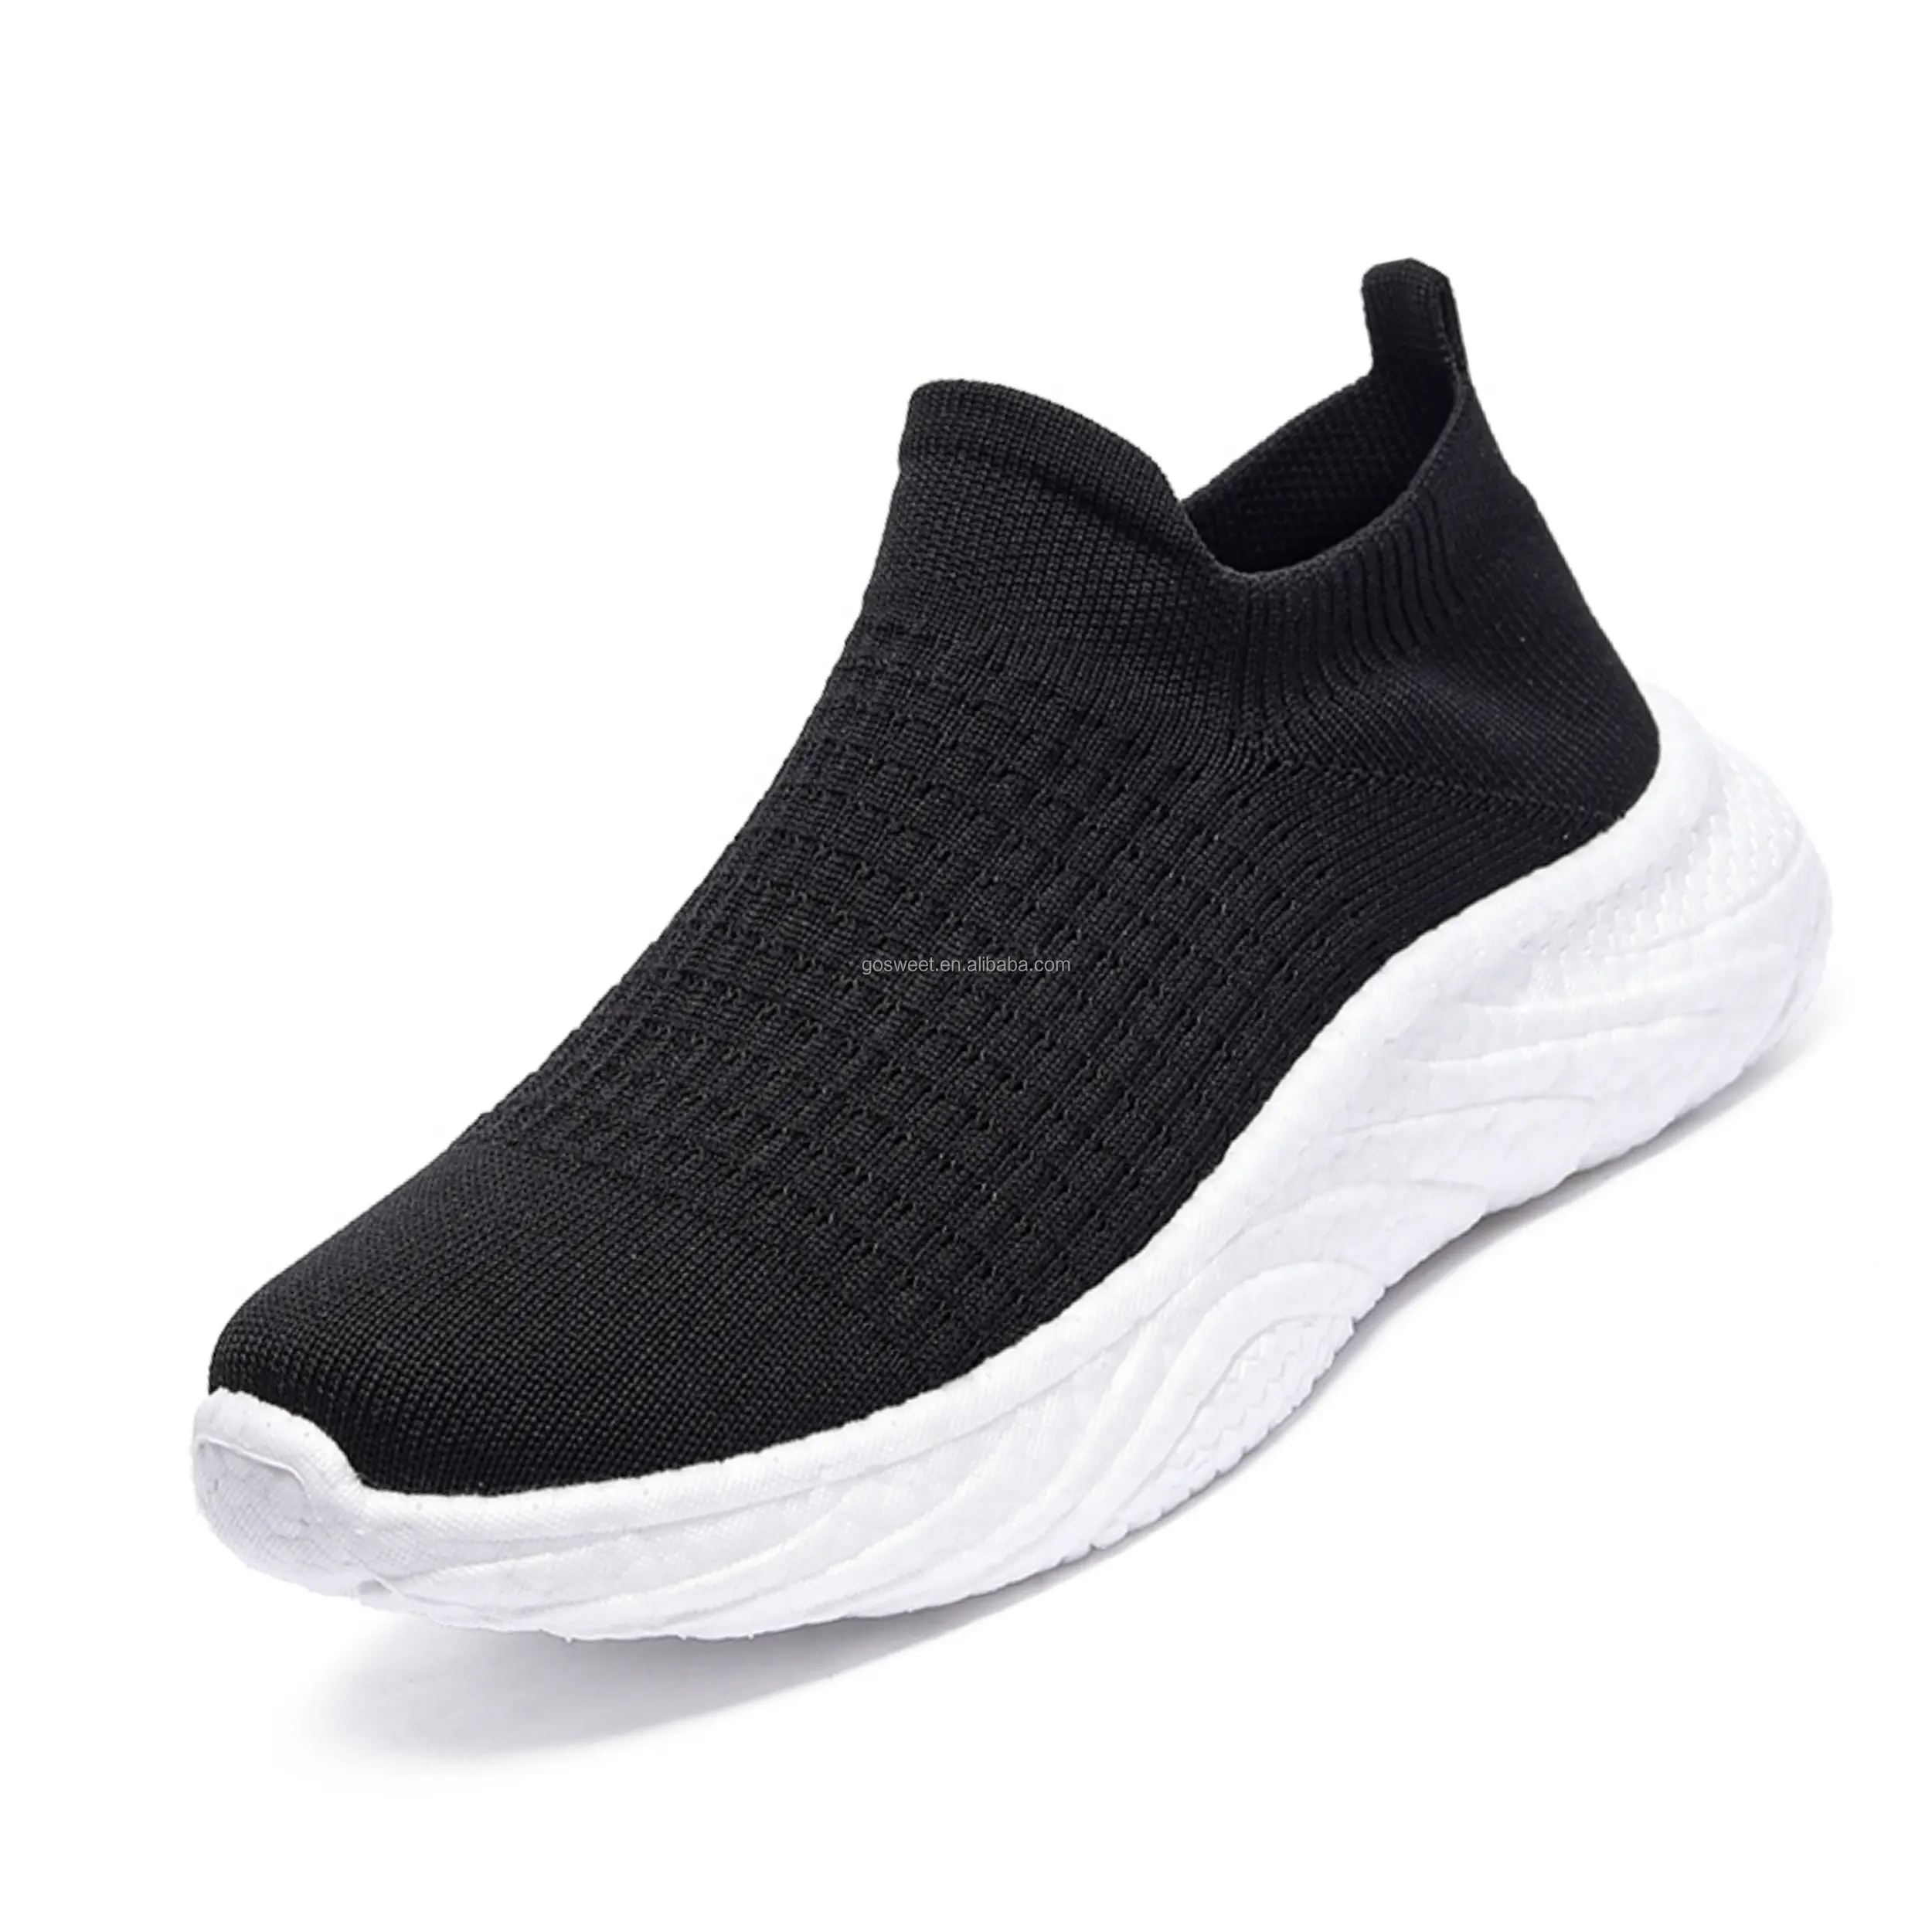 Knit breathable upper womens mens unisex ultra light weight cushioning tennis jogging casual walking shoes for lady women